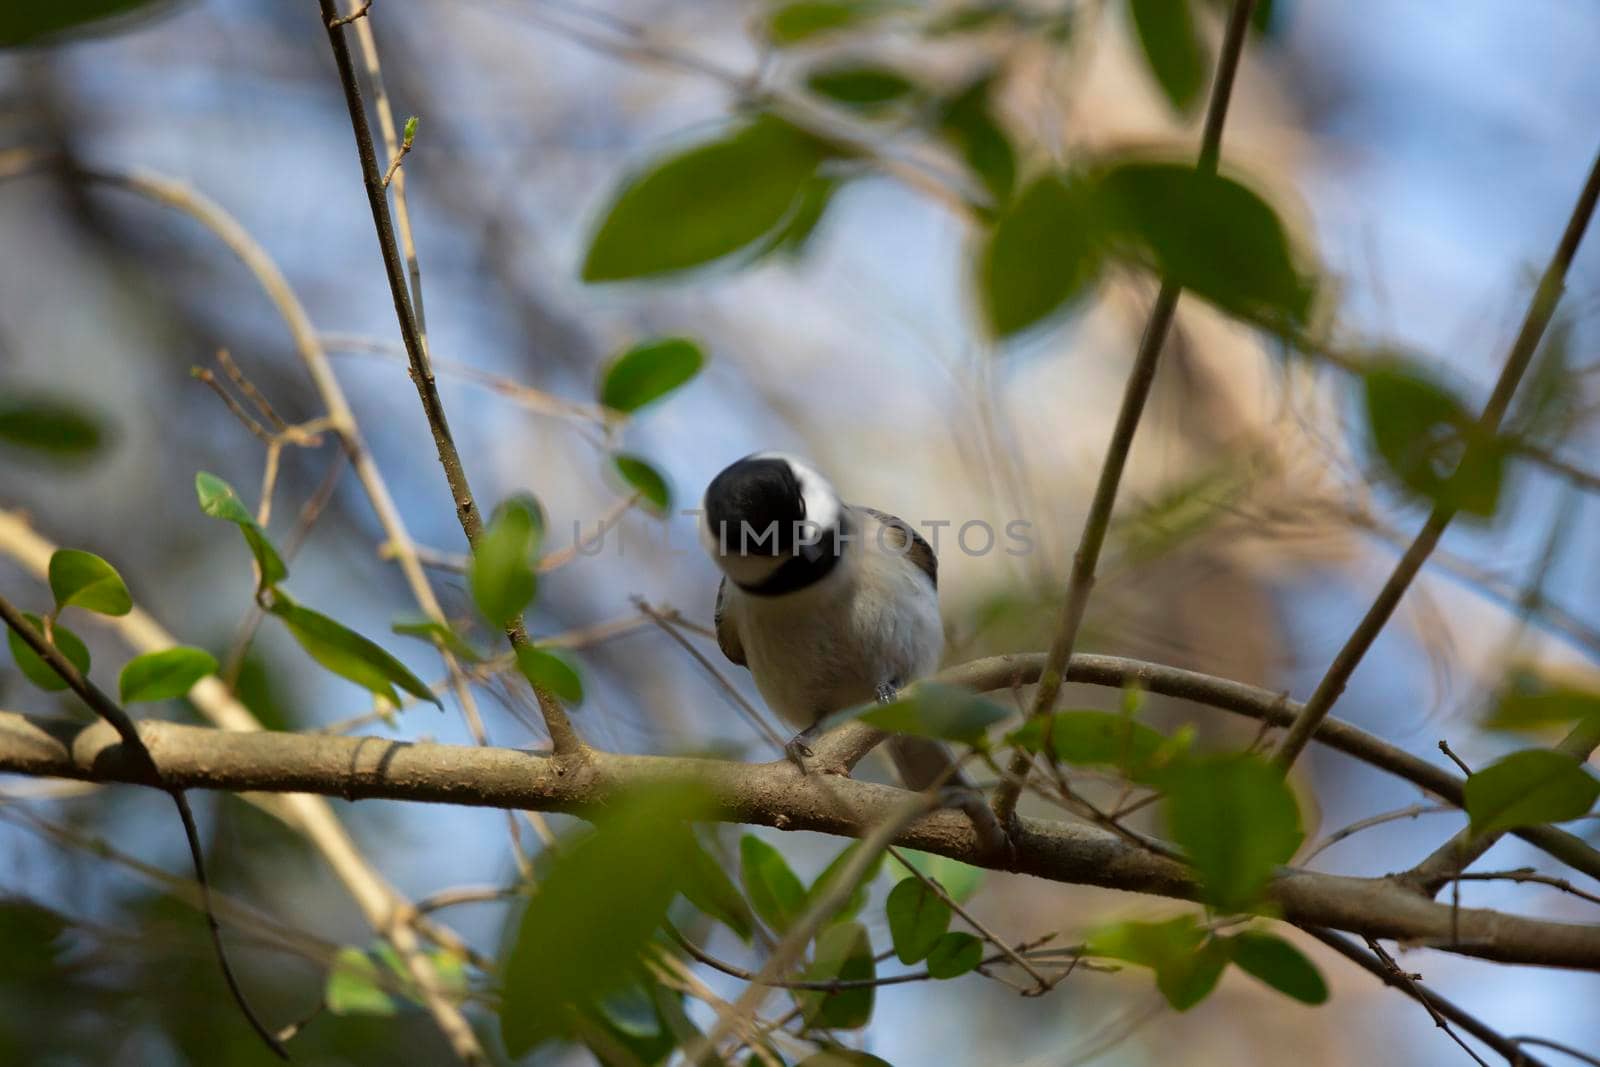 Black-capped chickadee (Poecile atricapillus) shaking its head on a branch